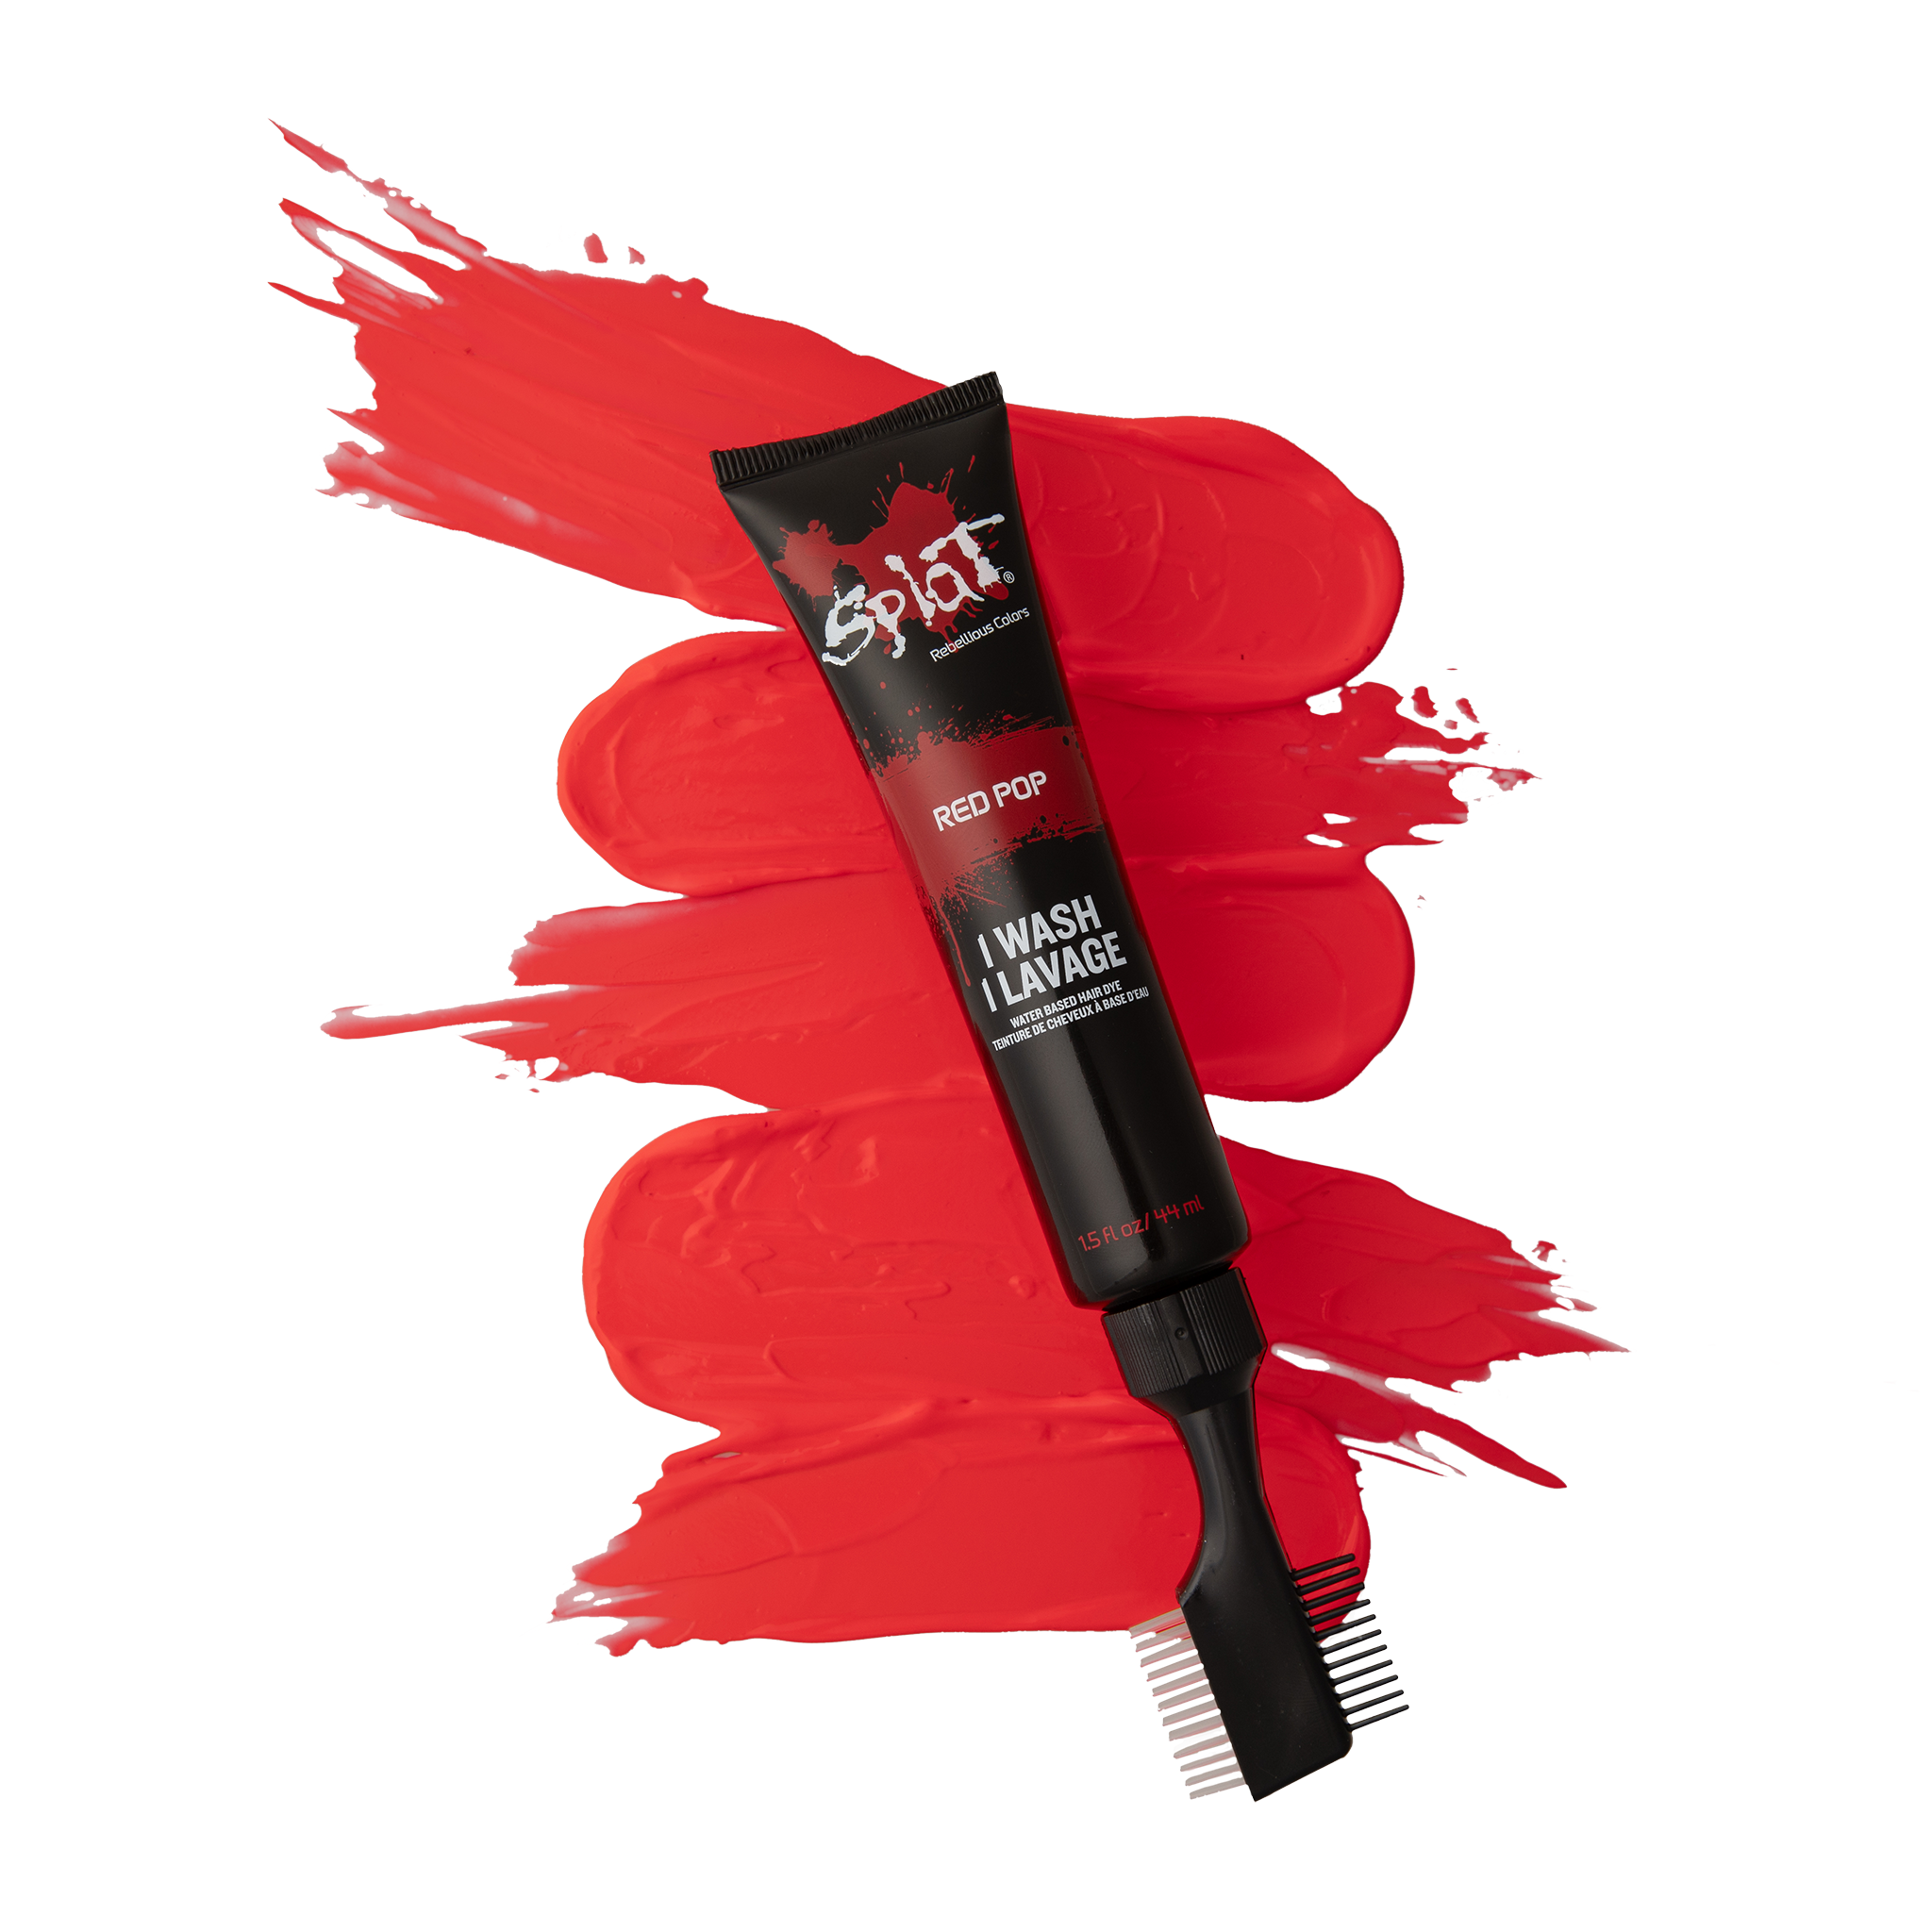 Red Pop: Red One-Wash Temporary Hair Dye